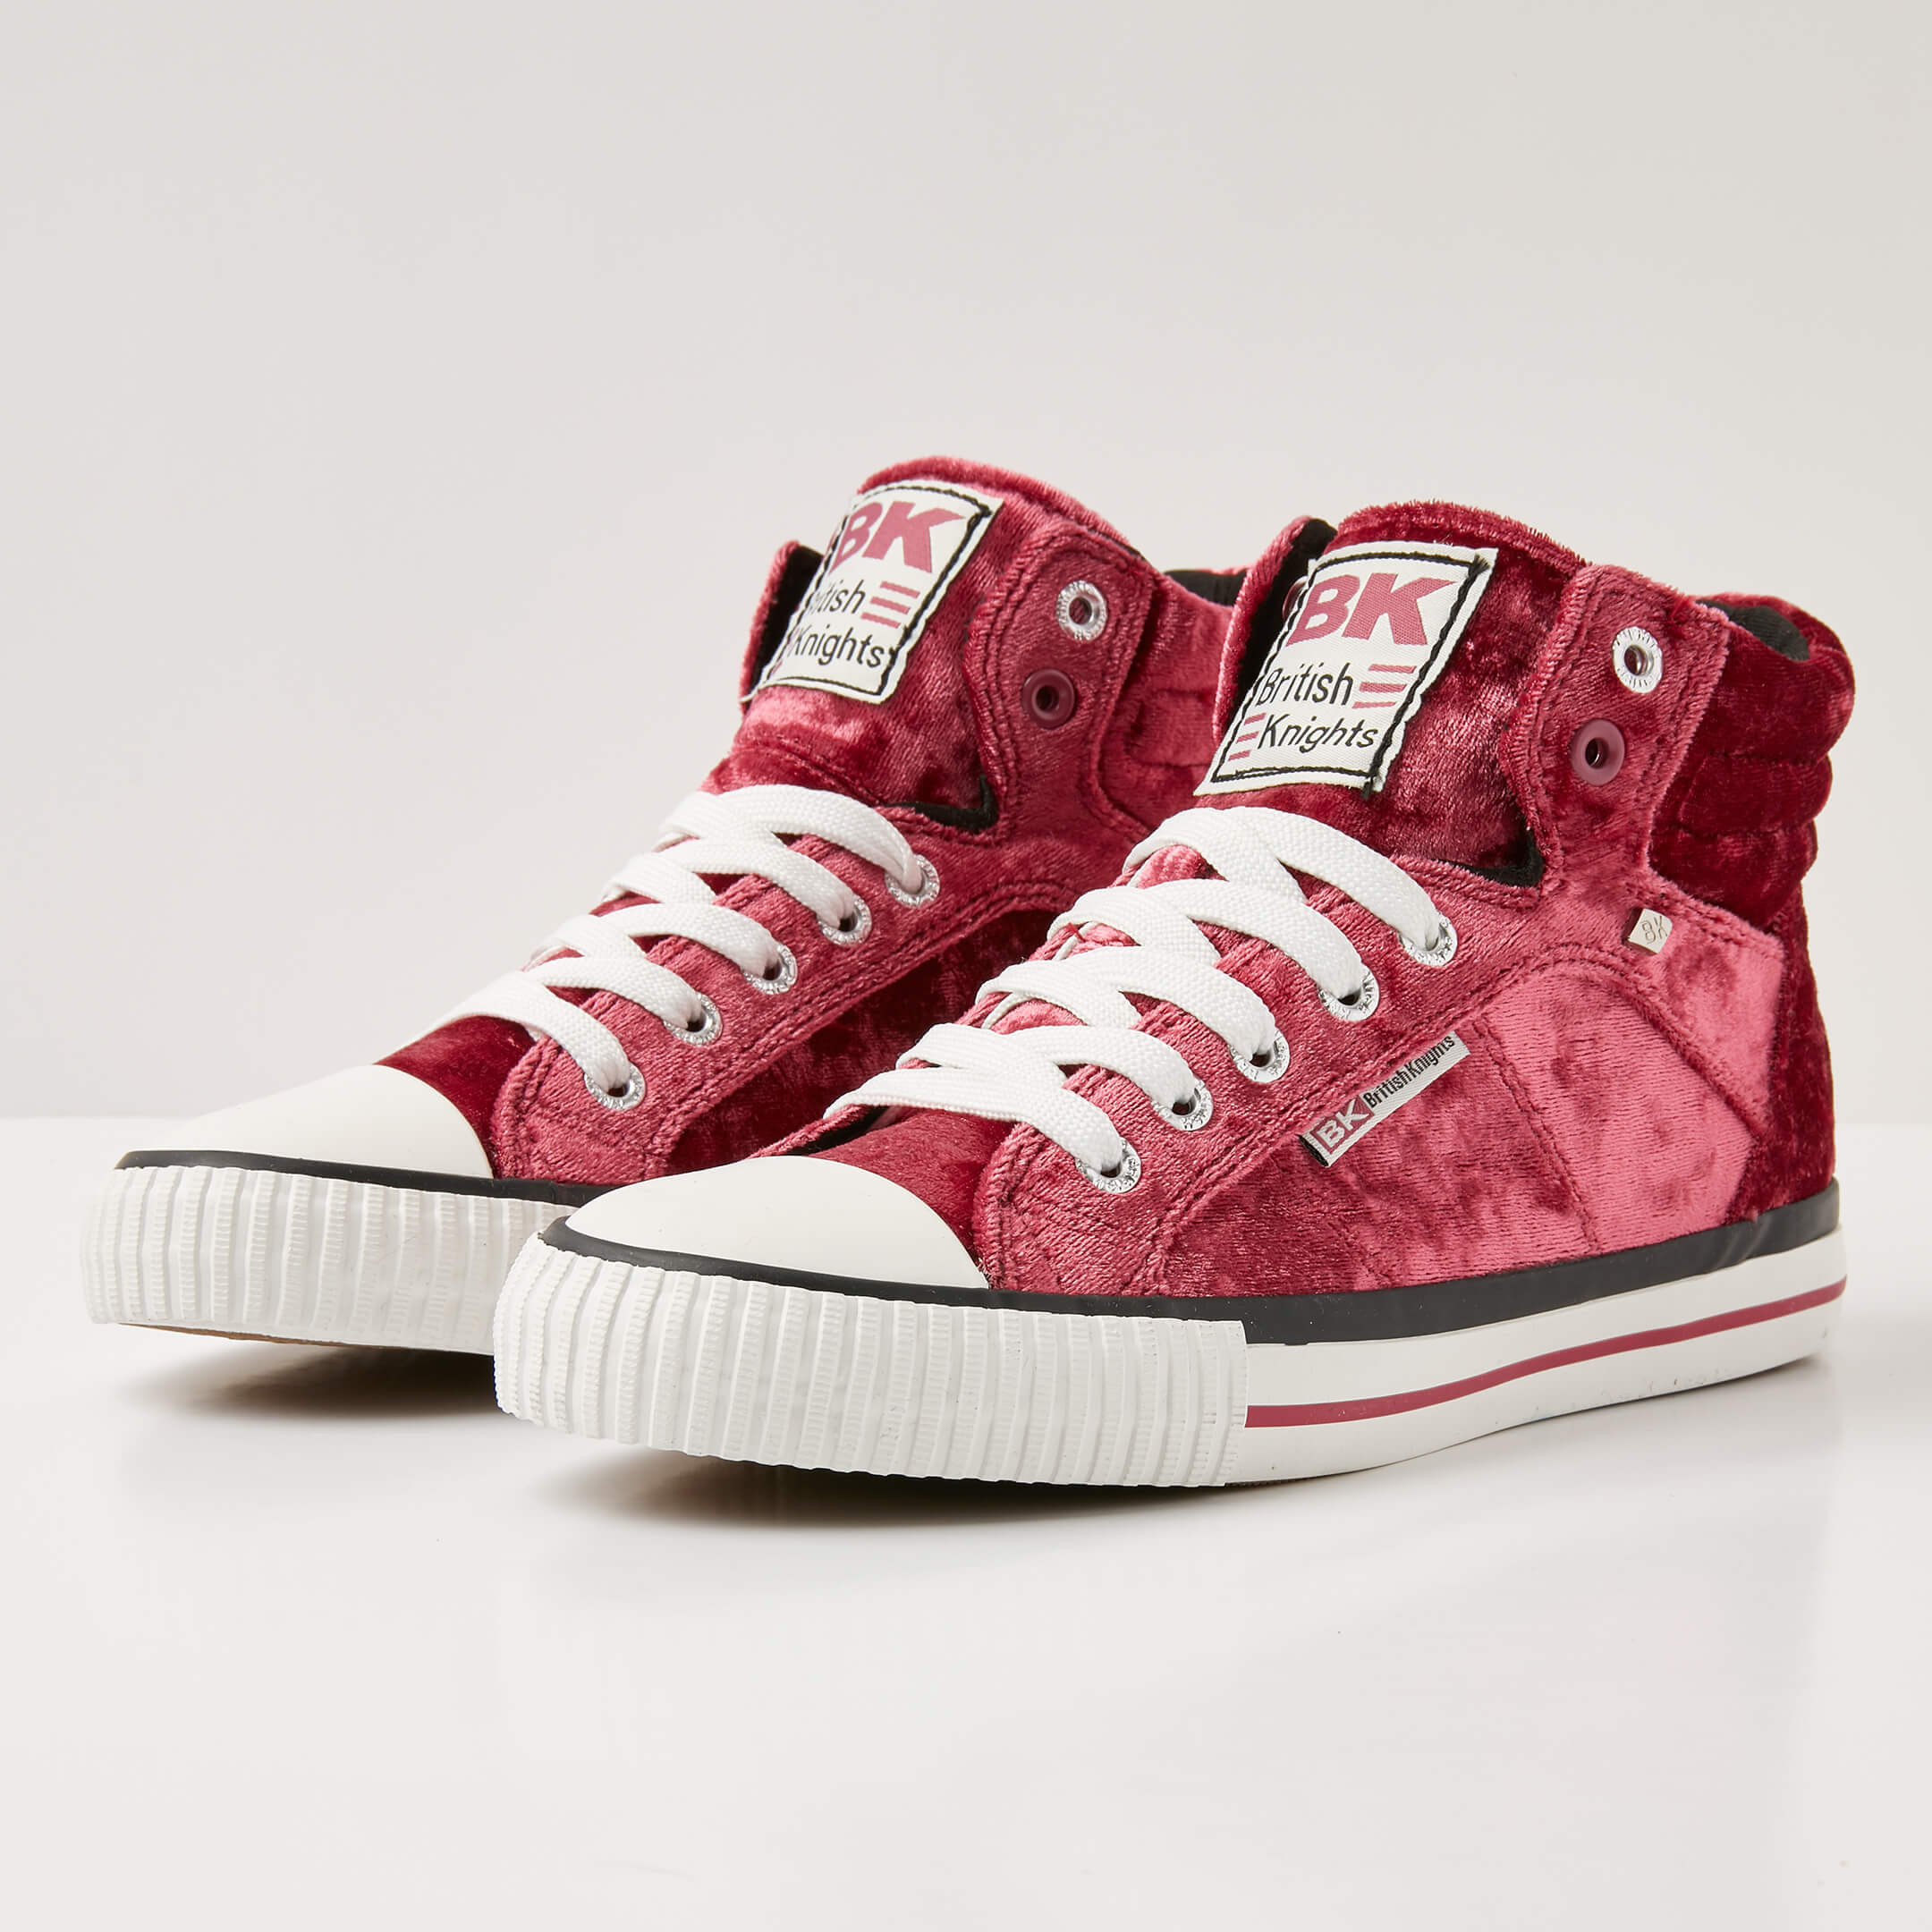 British Knights Sneaker Front view  B43-3732-01 DEE HIGH-TOP FEMALE